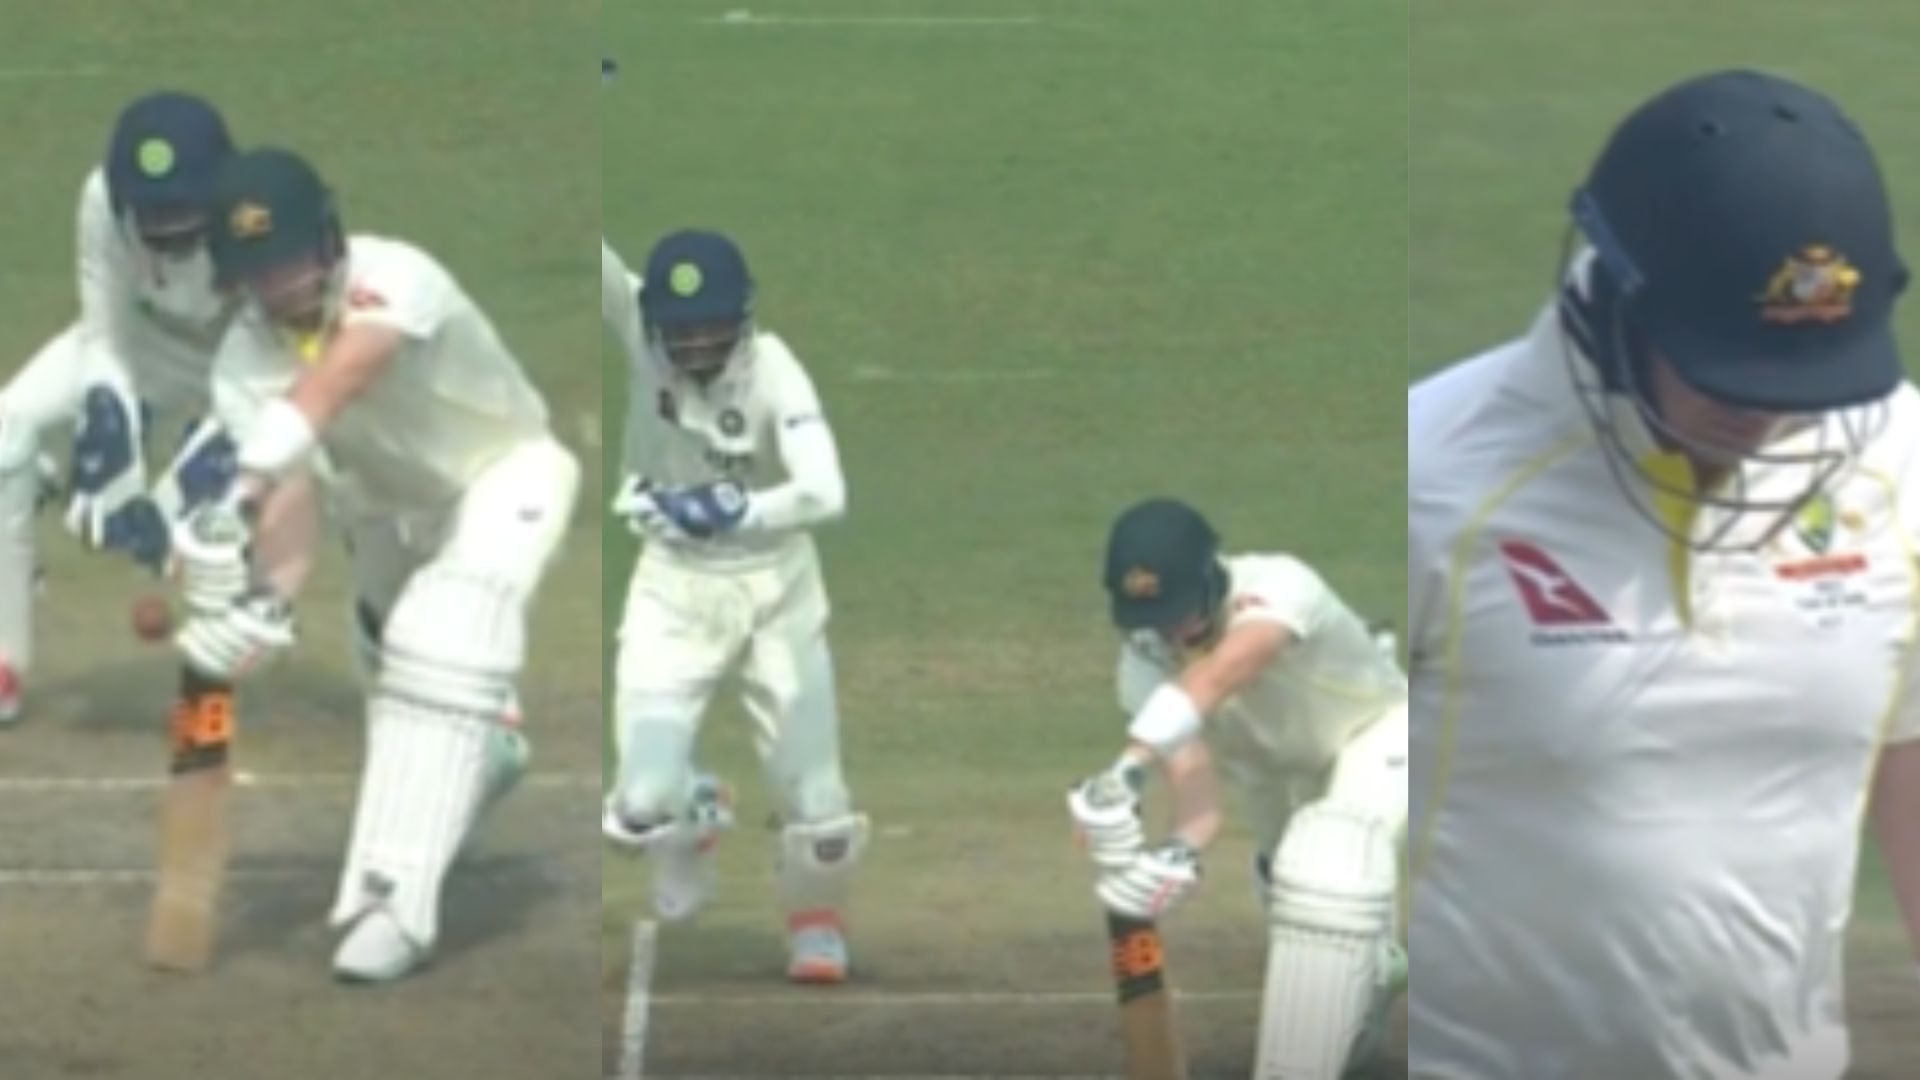 [WATCH] Steve Smith dismissed for a duck by R Ashwin in the 2nd IND vs AUS Test 